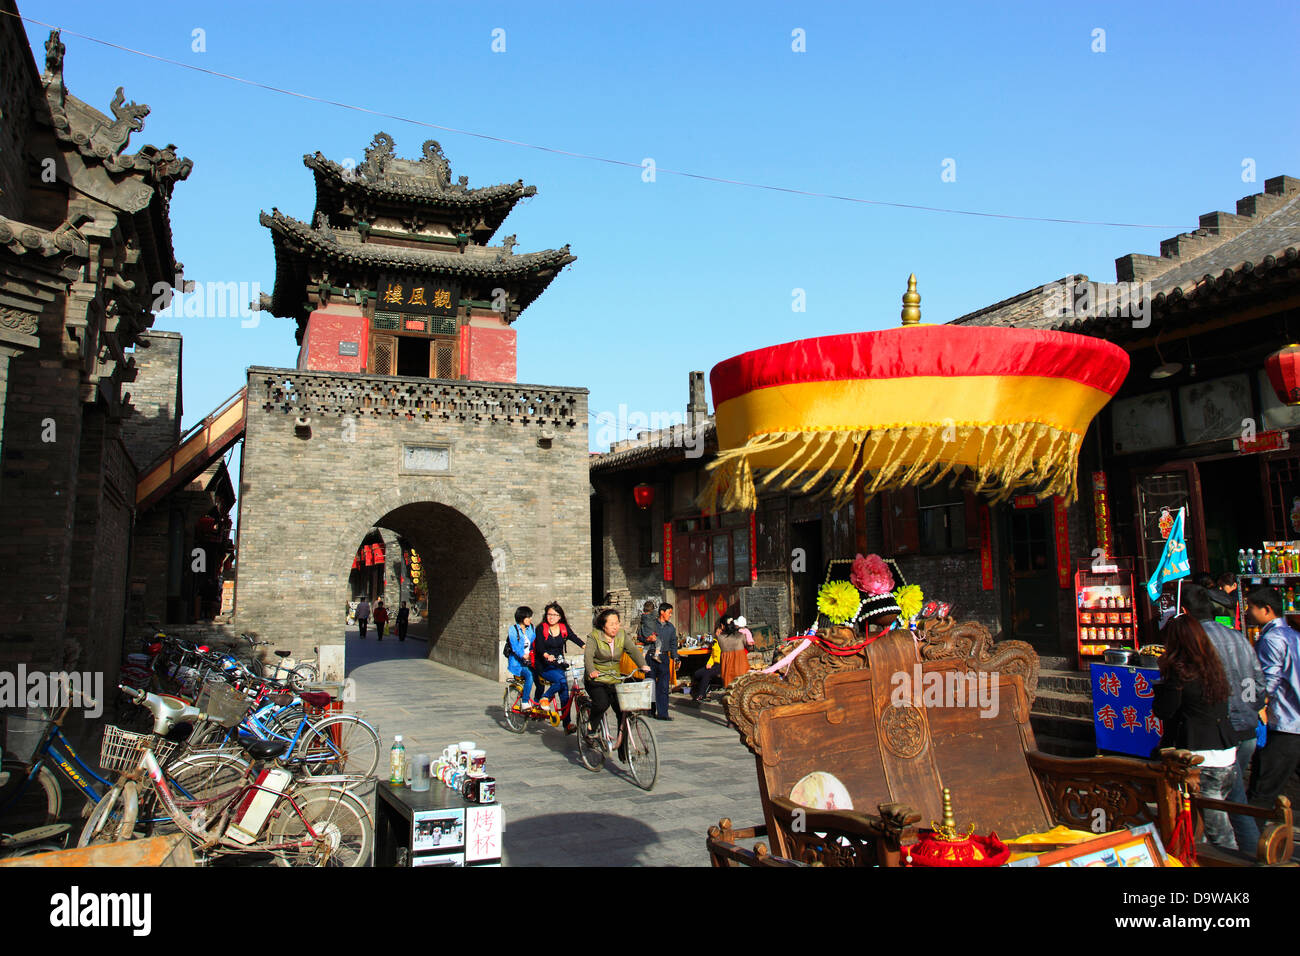 China, Shanxi Province, Pingyao County, Pingyao Ancient City, Yongding Gate, Fengshui Tower Stock Photo